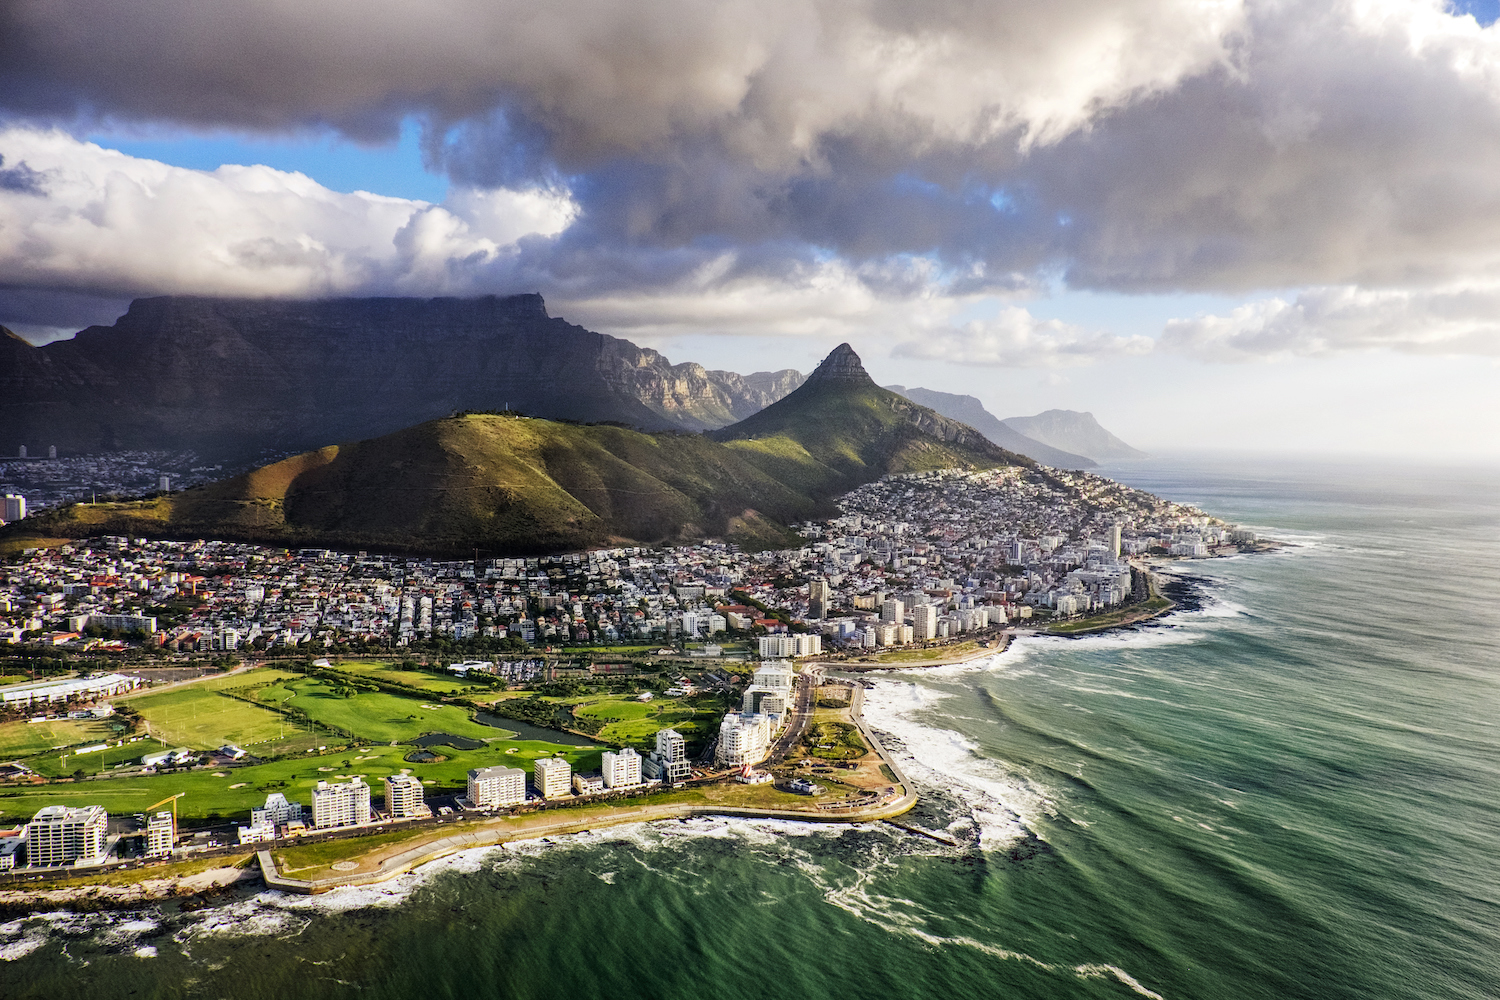 Sprawling view of Cape Town and the Mountains that frame it, Table Mountain and Lion's Head.